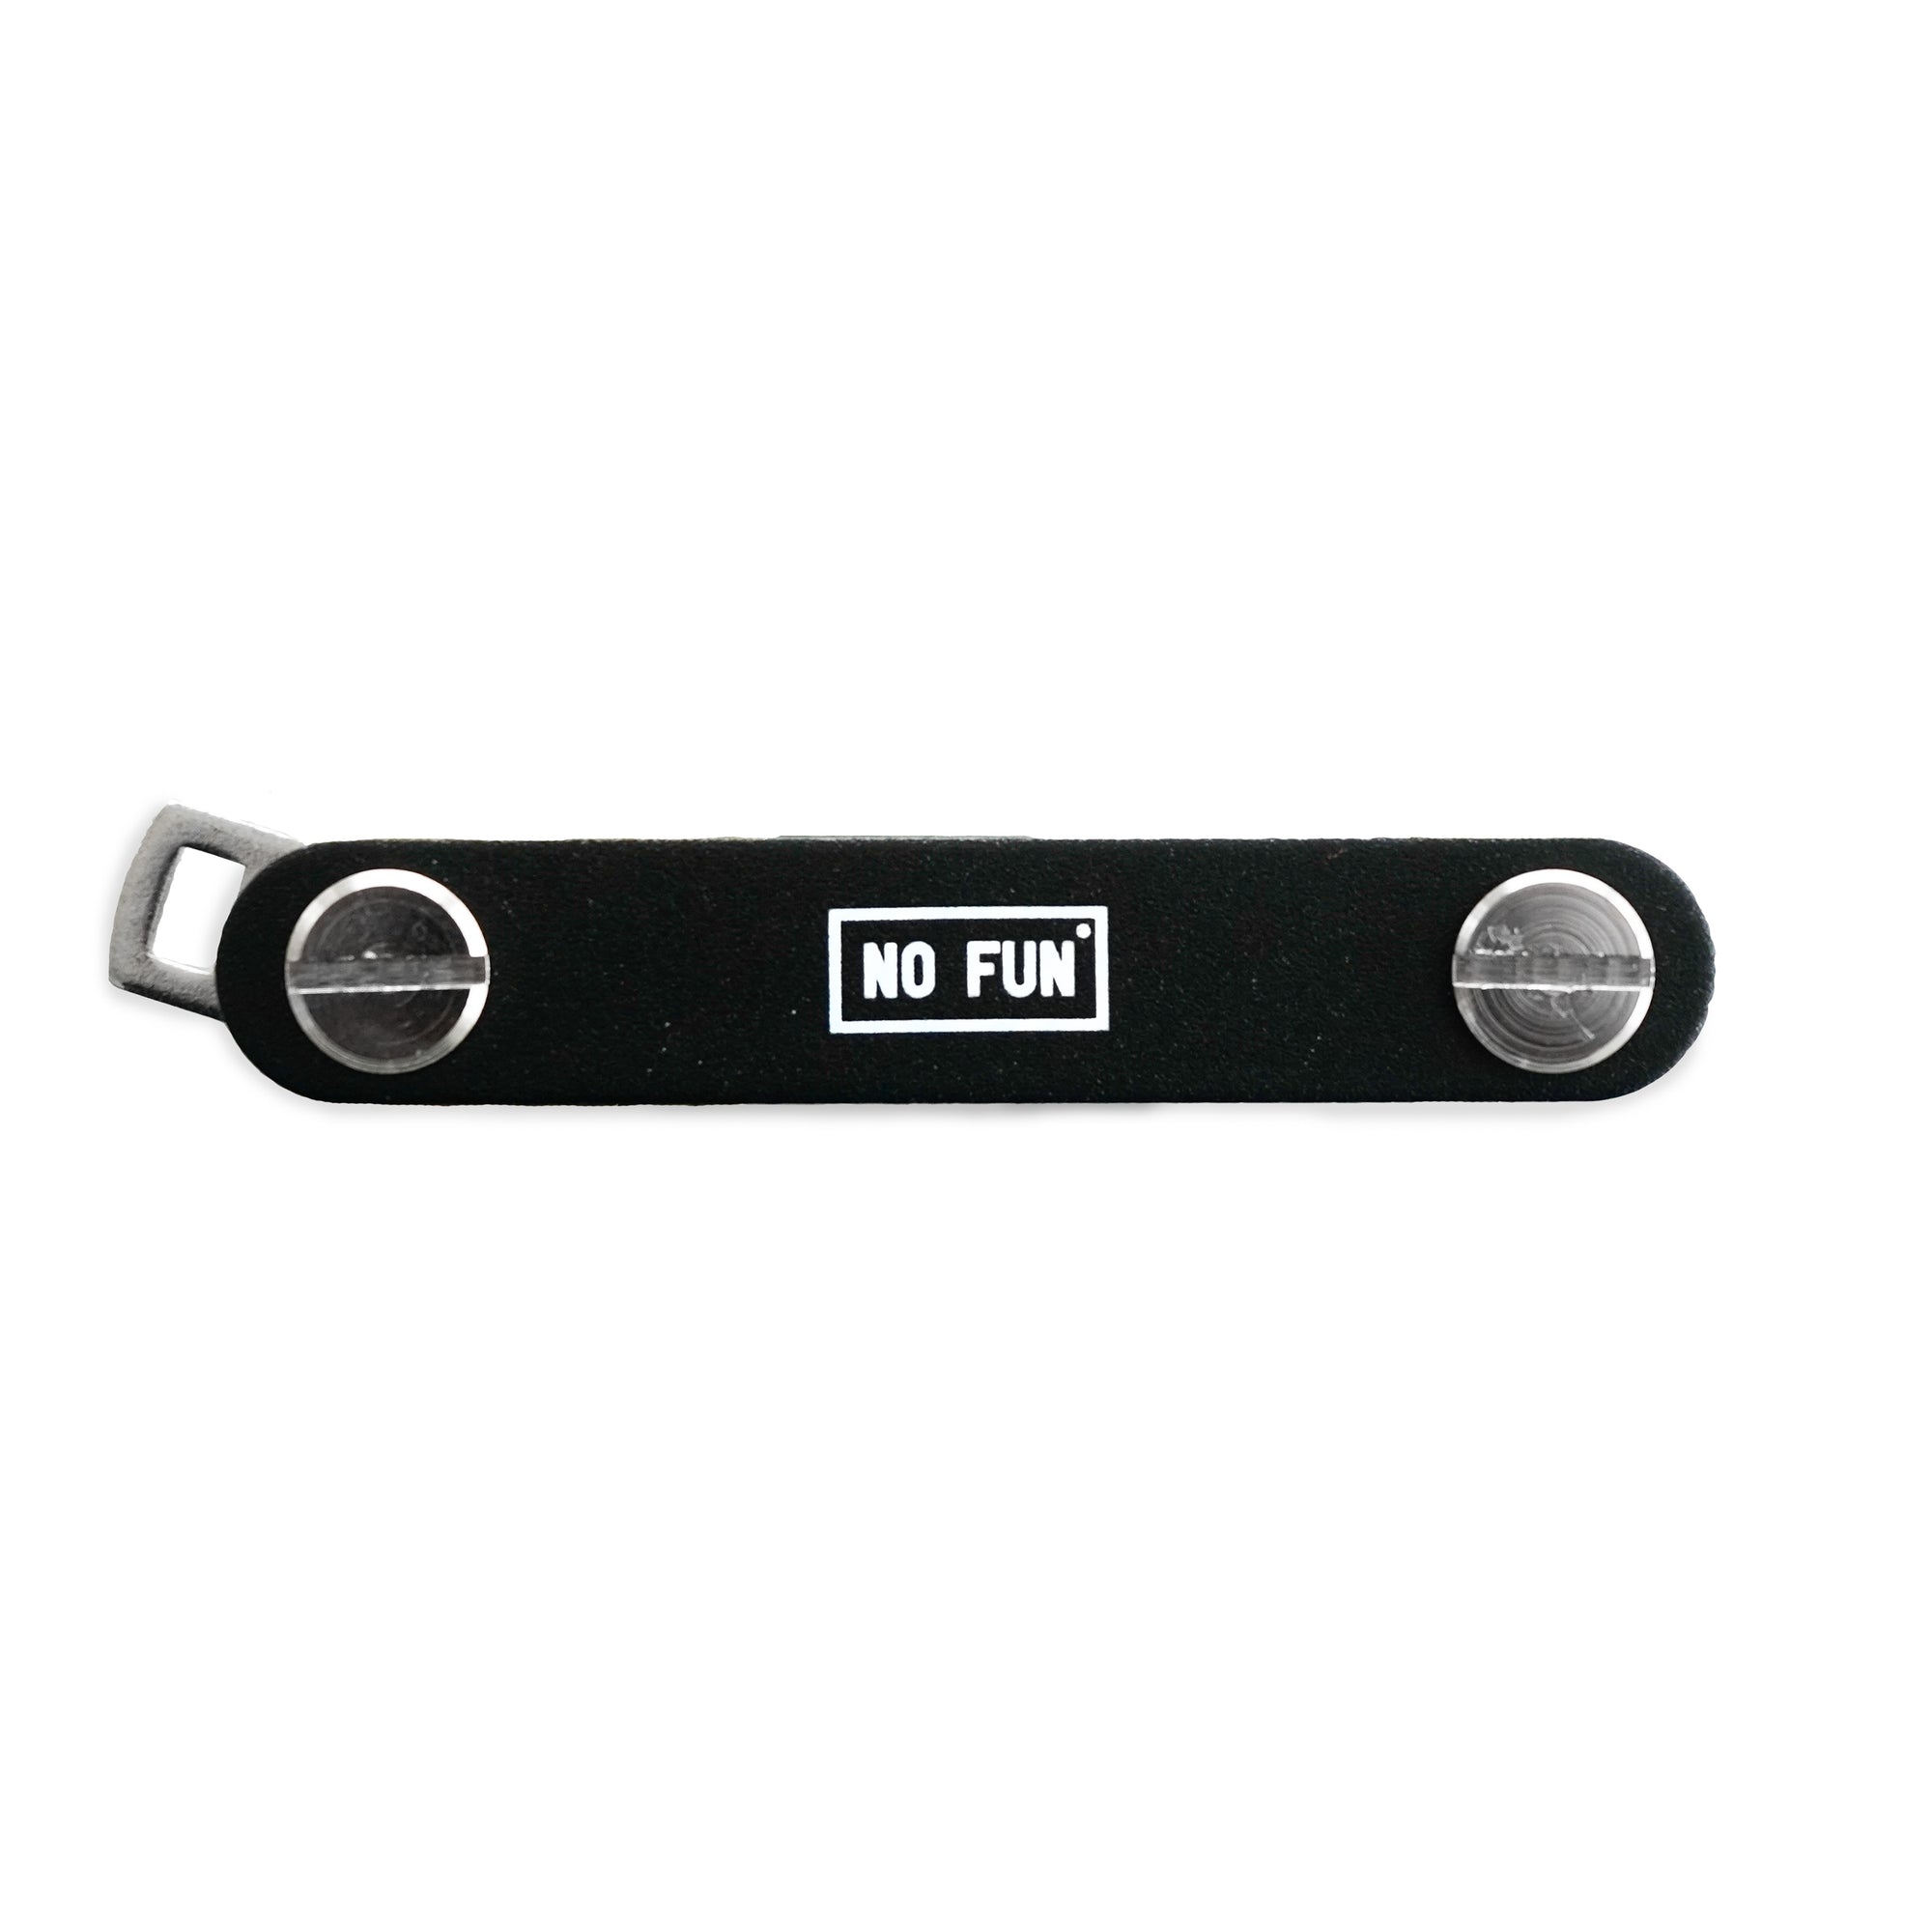 Photo features the "No Fun®" key holder against a white background.  The product is black, with a small white "No Fun®" logo that is found in the enter. 